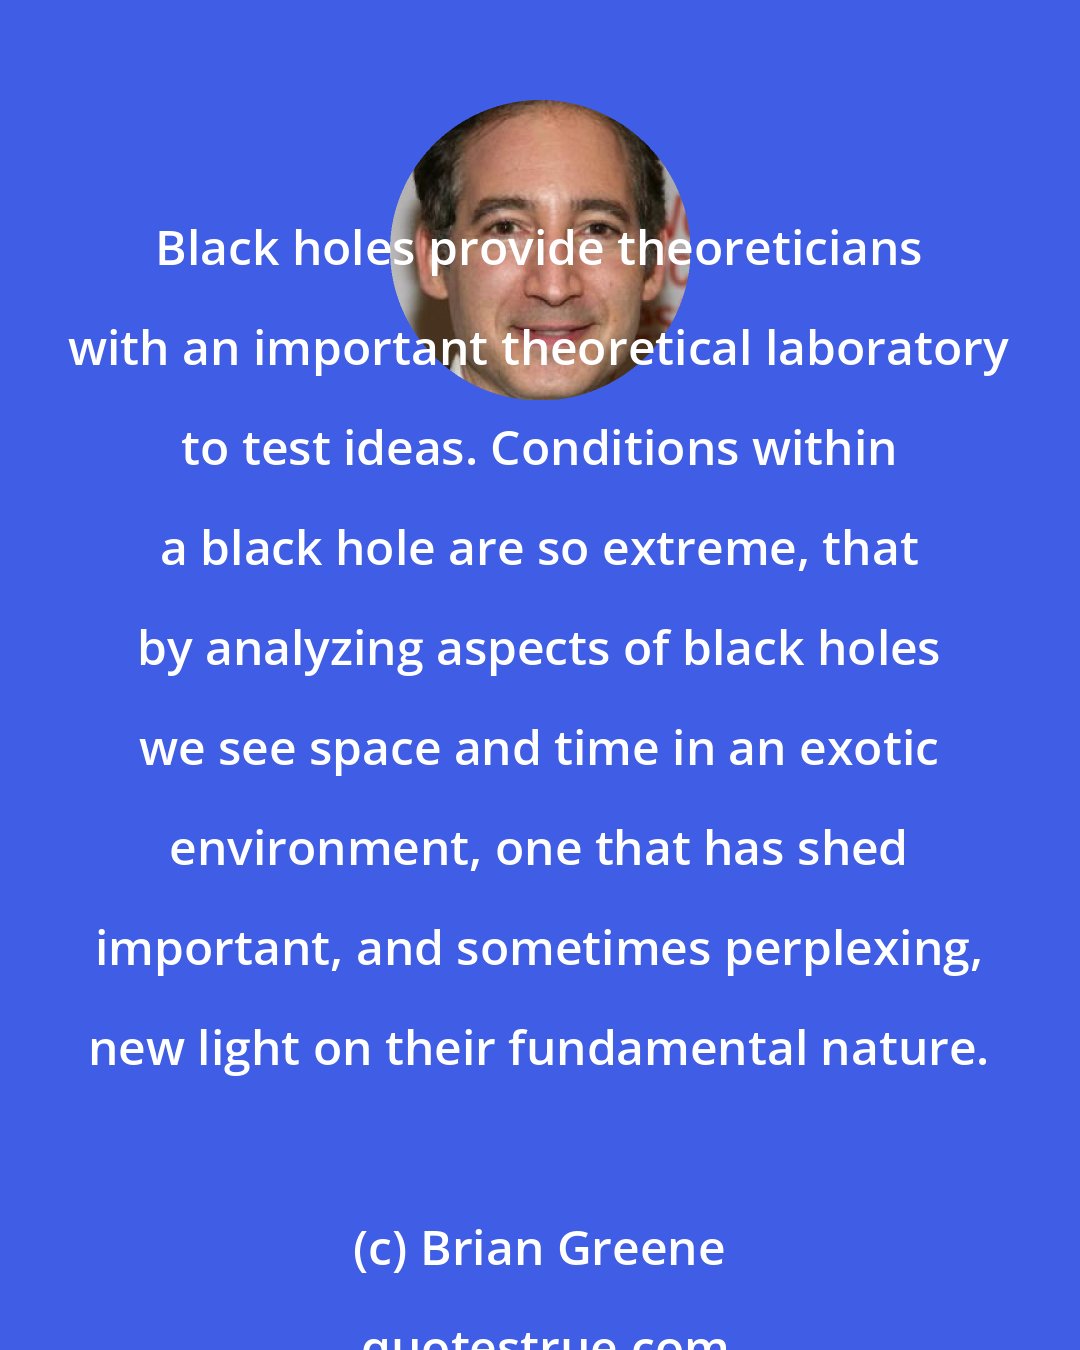 Brian Greene: Black holes provide theoreticians with an important theoretical laboratory to test ideas. Conditions within a black hole are so extreme, that by analyzing aspects of black holes we see space and time in an exotic environment, one that has shed important, and sometimes perplexing, new light on their fundamental nature.